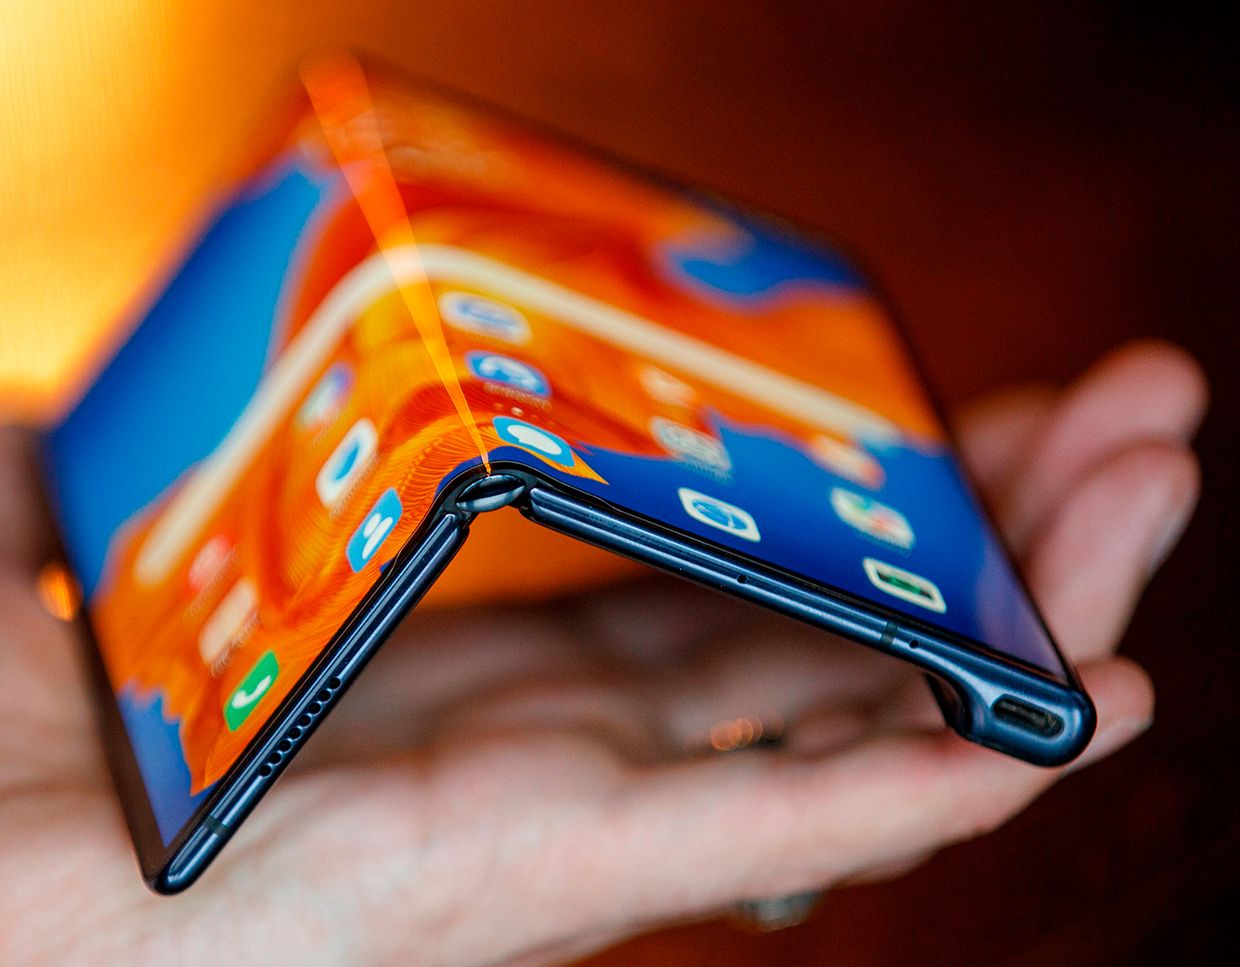 Image displaying the flexible features of the Huawei Mate Xs smartphone.